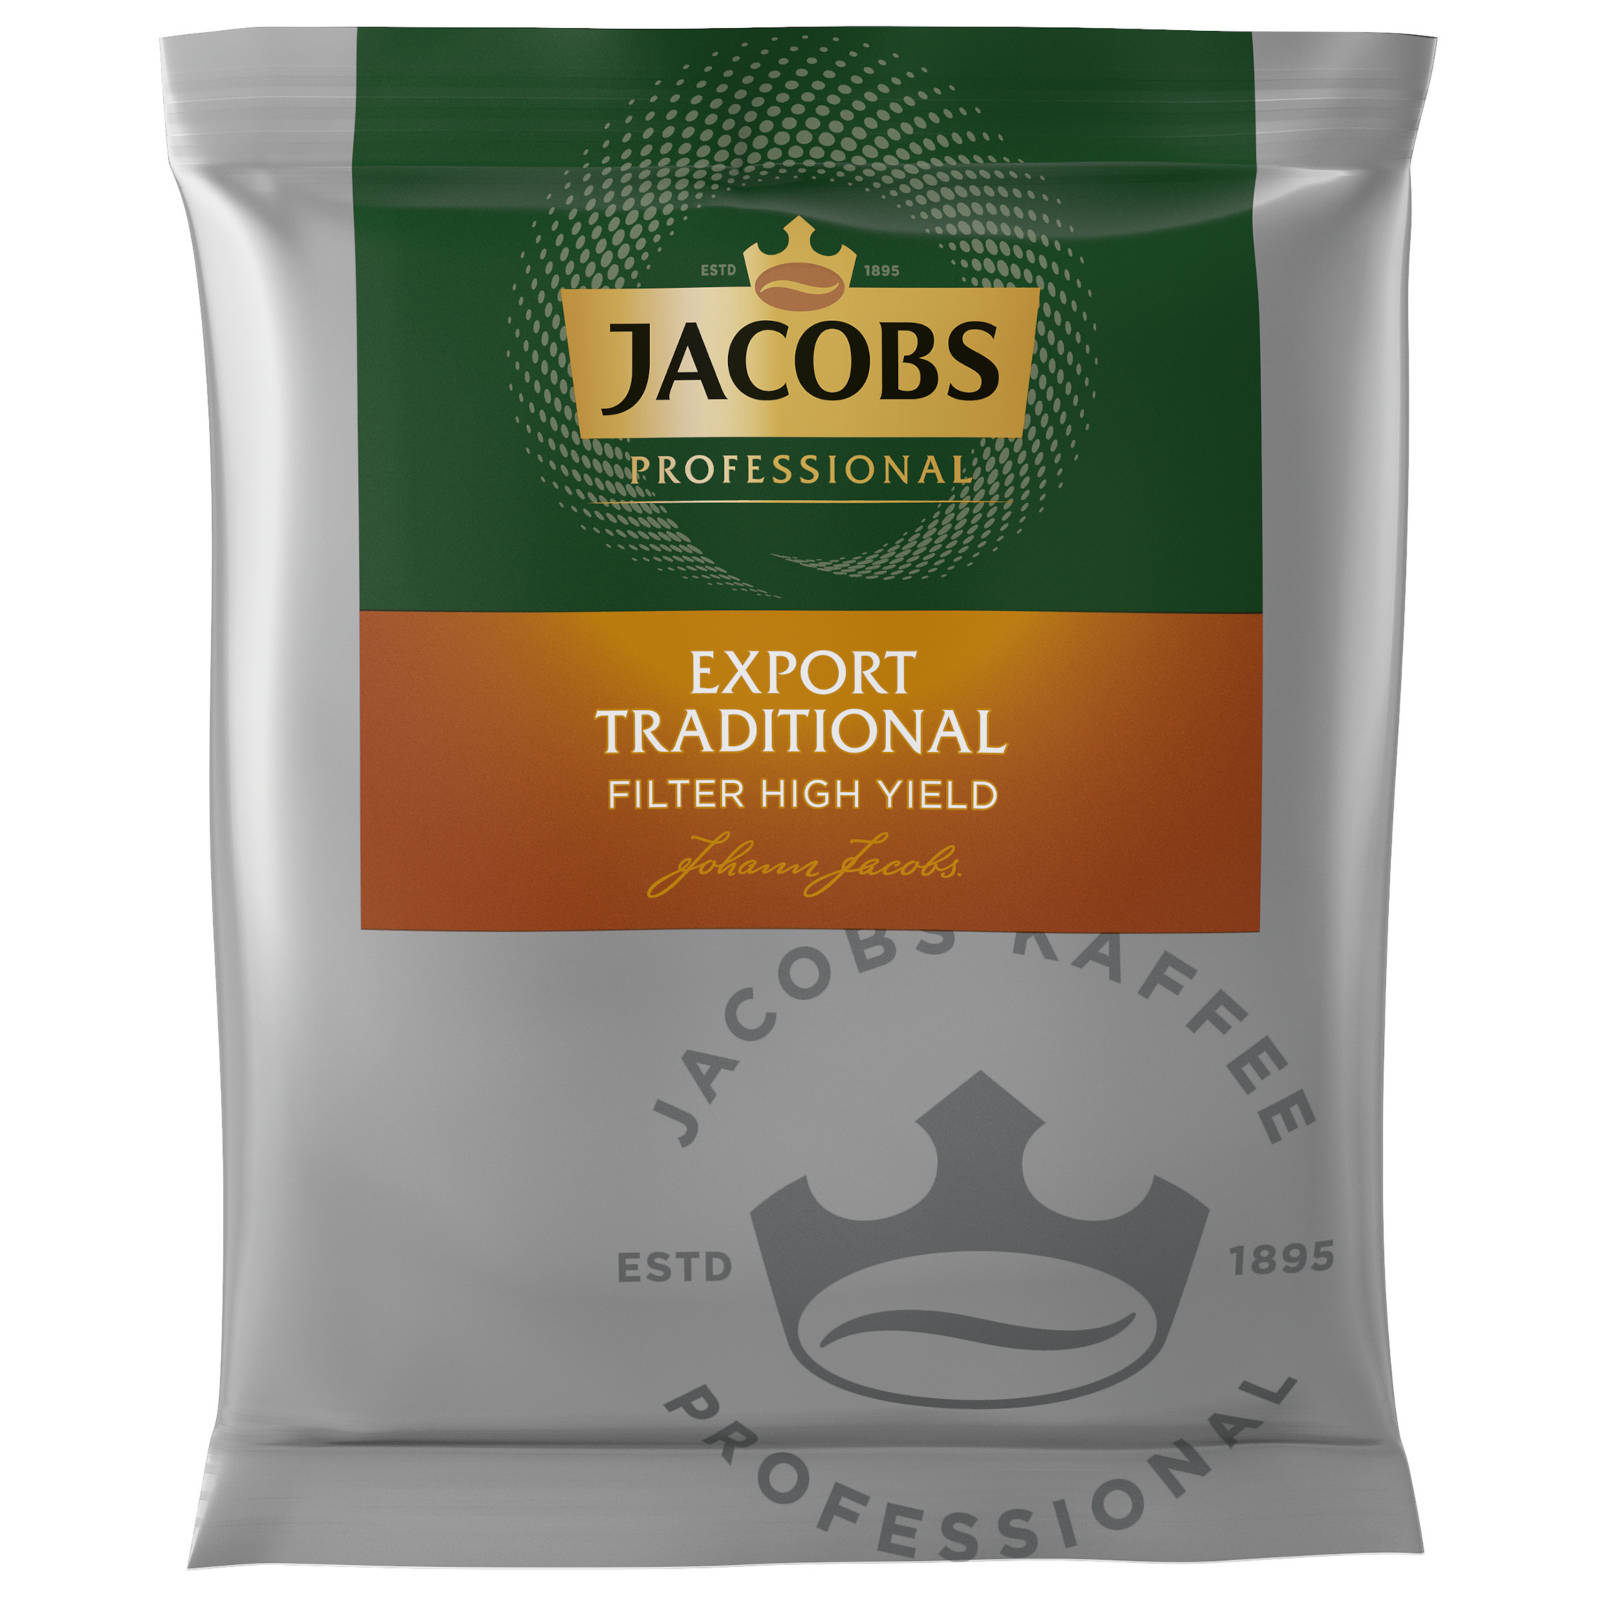 JACOBS HY Professional Press) French JACOBS Export (Filter, Filterkaffee Traditional